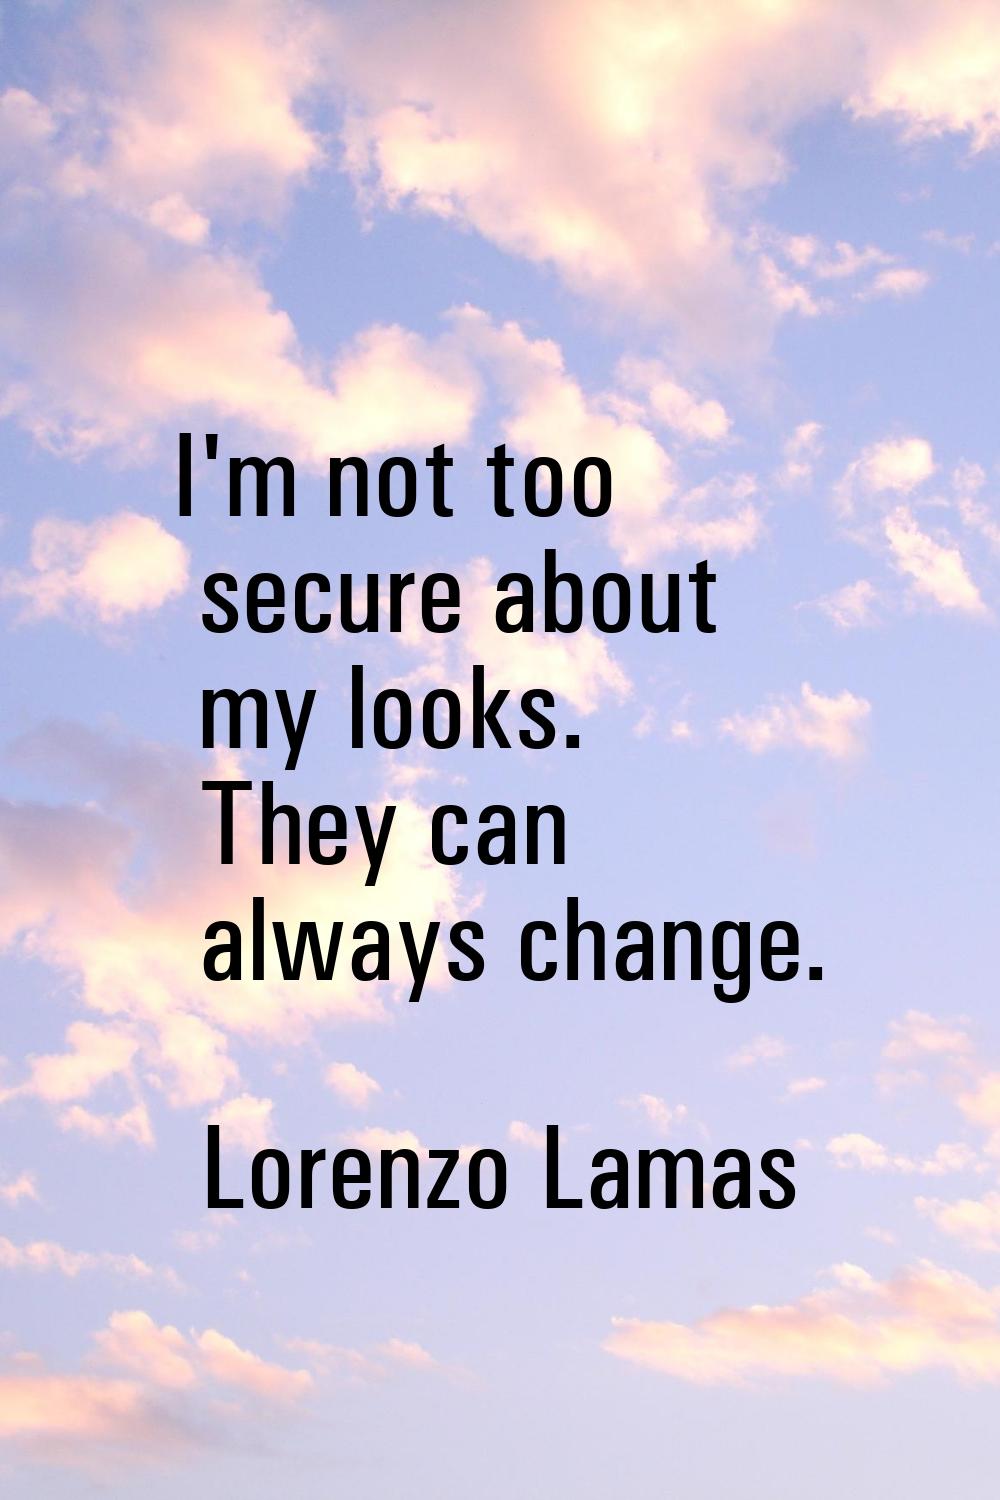 I'm not too secure about my looks. They can always change.